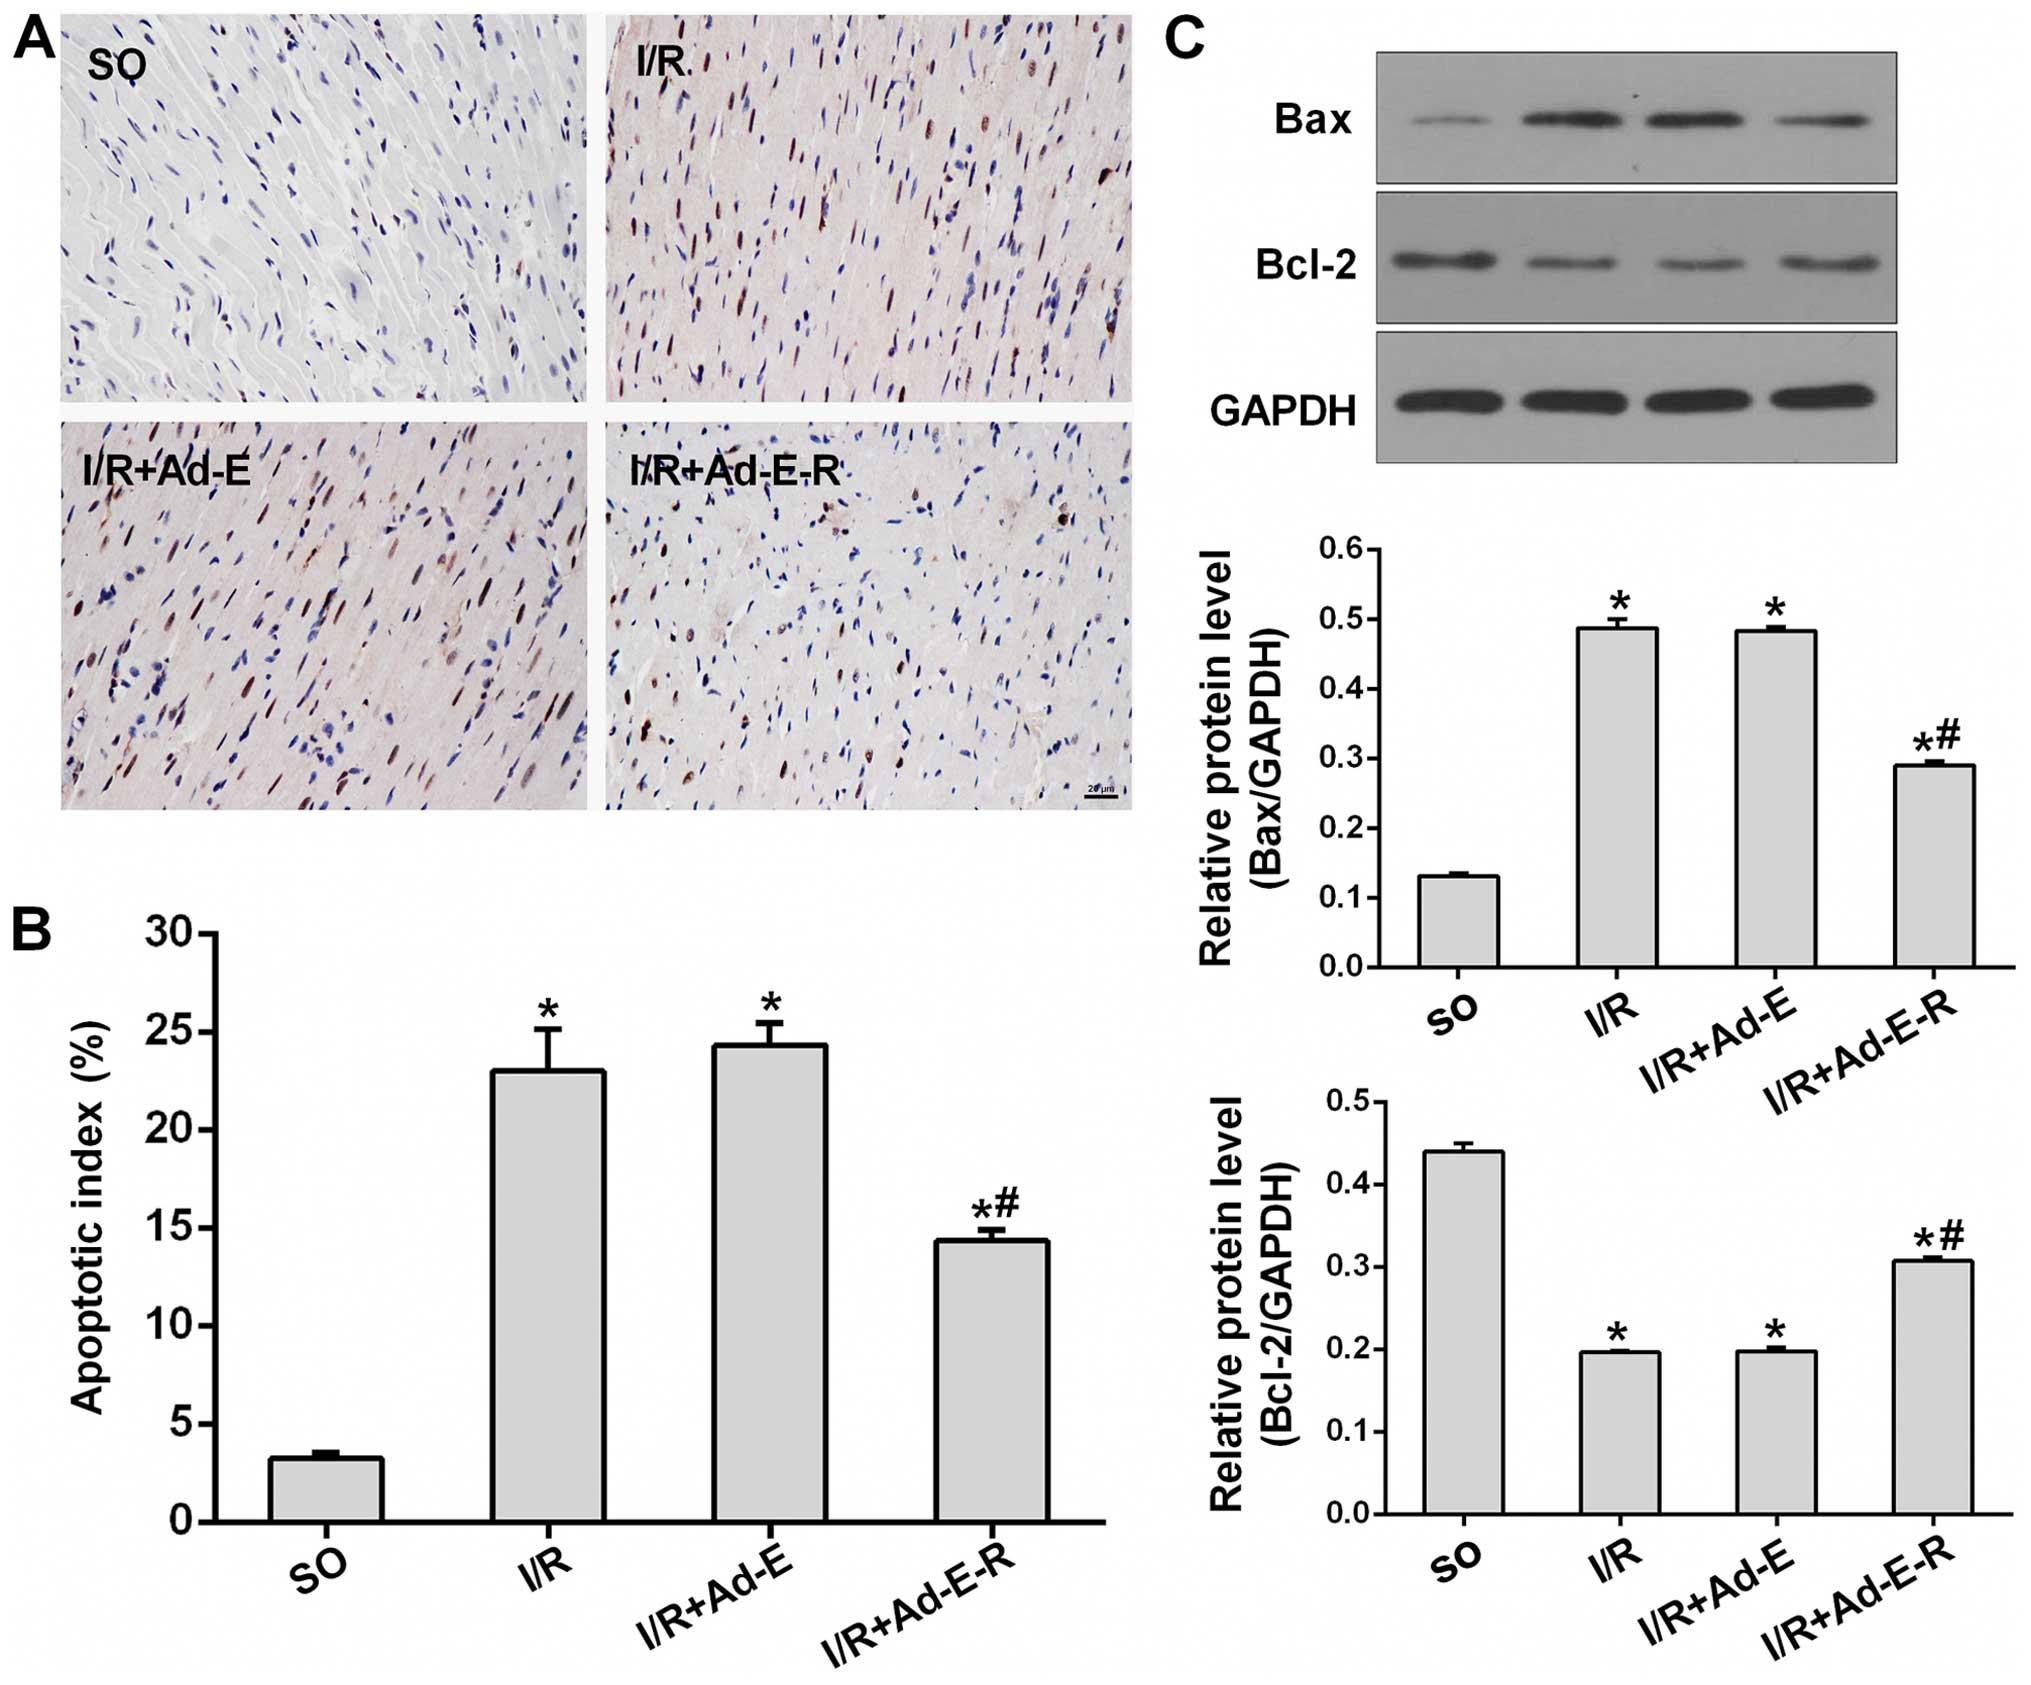 Radioprotective 105 Kda Protein Attenuates Ischemia Reperfusion Induced Myocardial Apoptosis And Autophagy By Inhibiting The Activation Of The Tlr4 Nf Kb Signaling Pathway In Rats